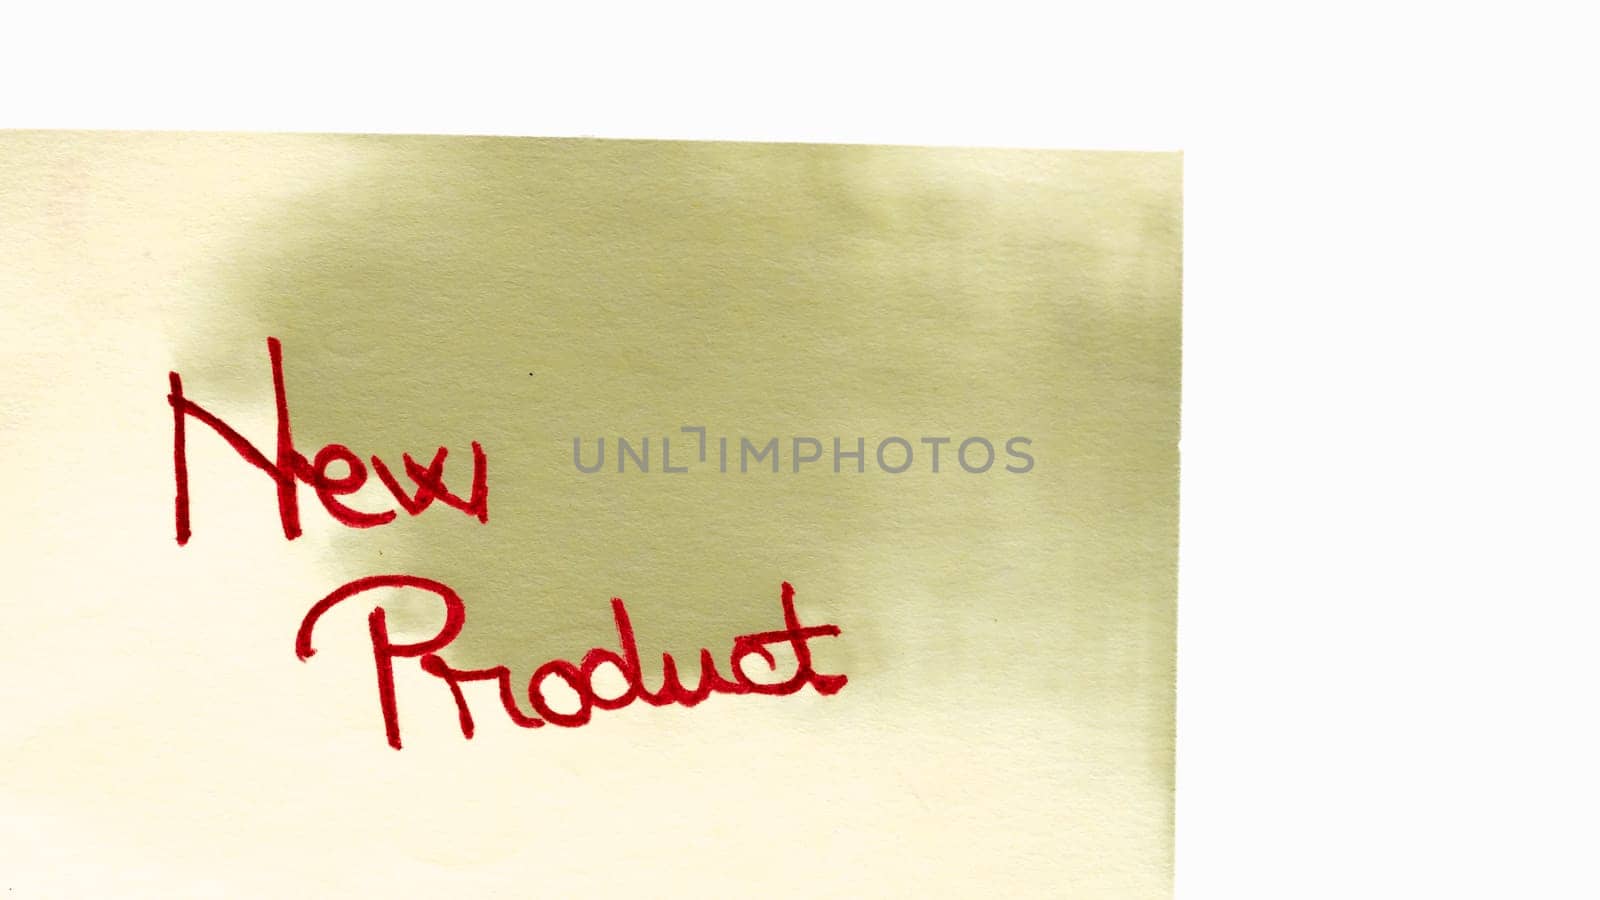 New product handwriting text close up isolated on yellow paper with copy space.